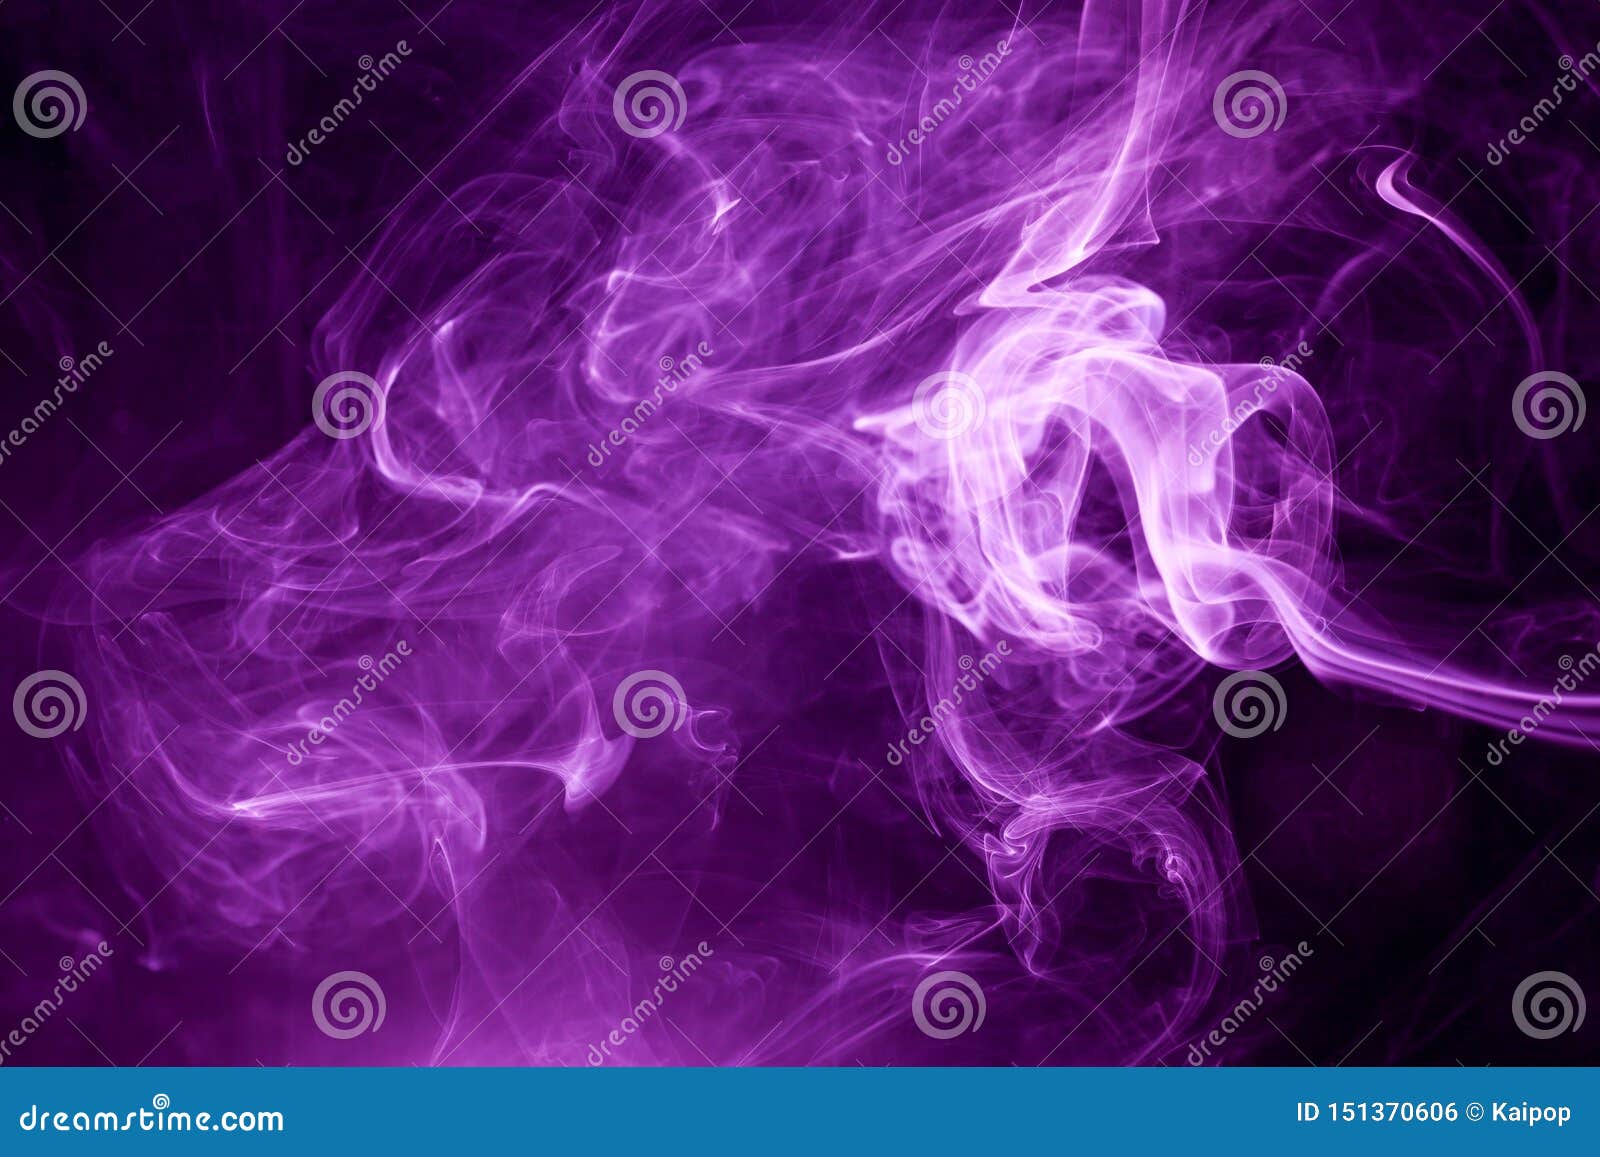 Vibrant Purple Smoke Texture In An Abstract Background, Steam Background,  Smoke Overlay, Vapor Background Image And Wallpaper for Free Download